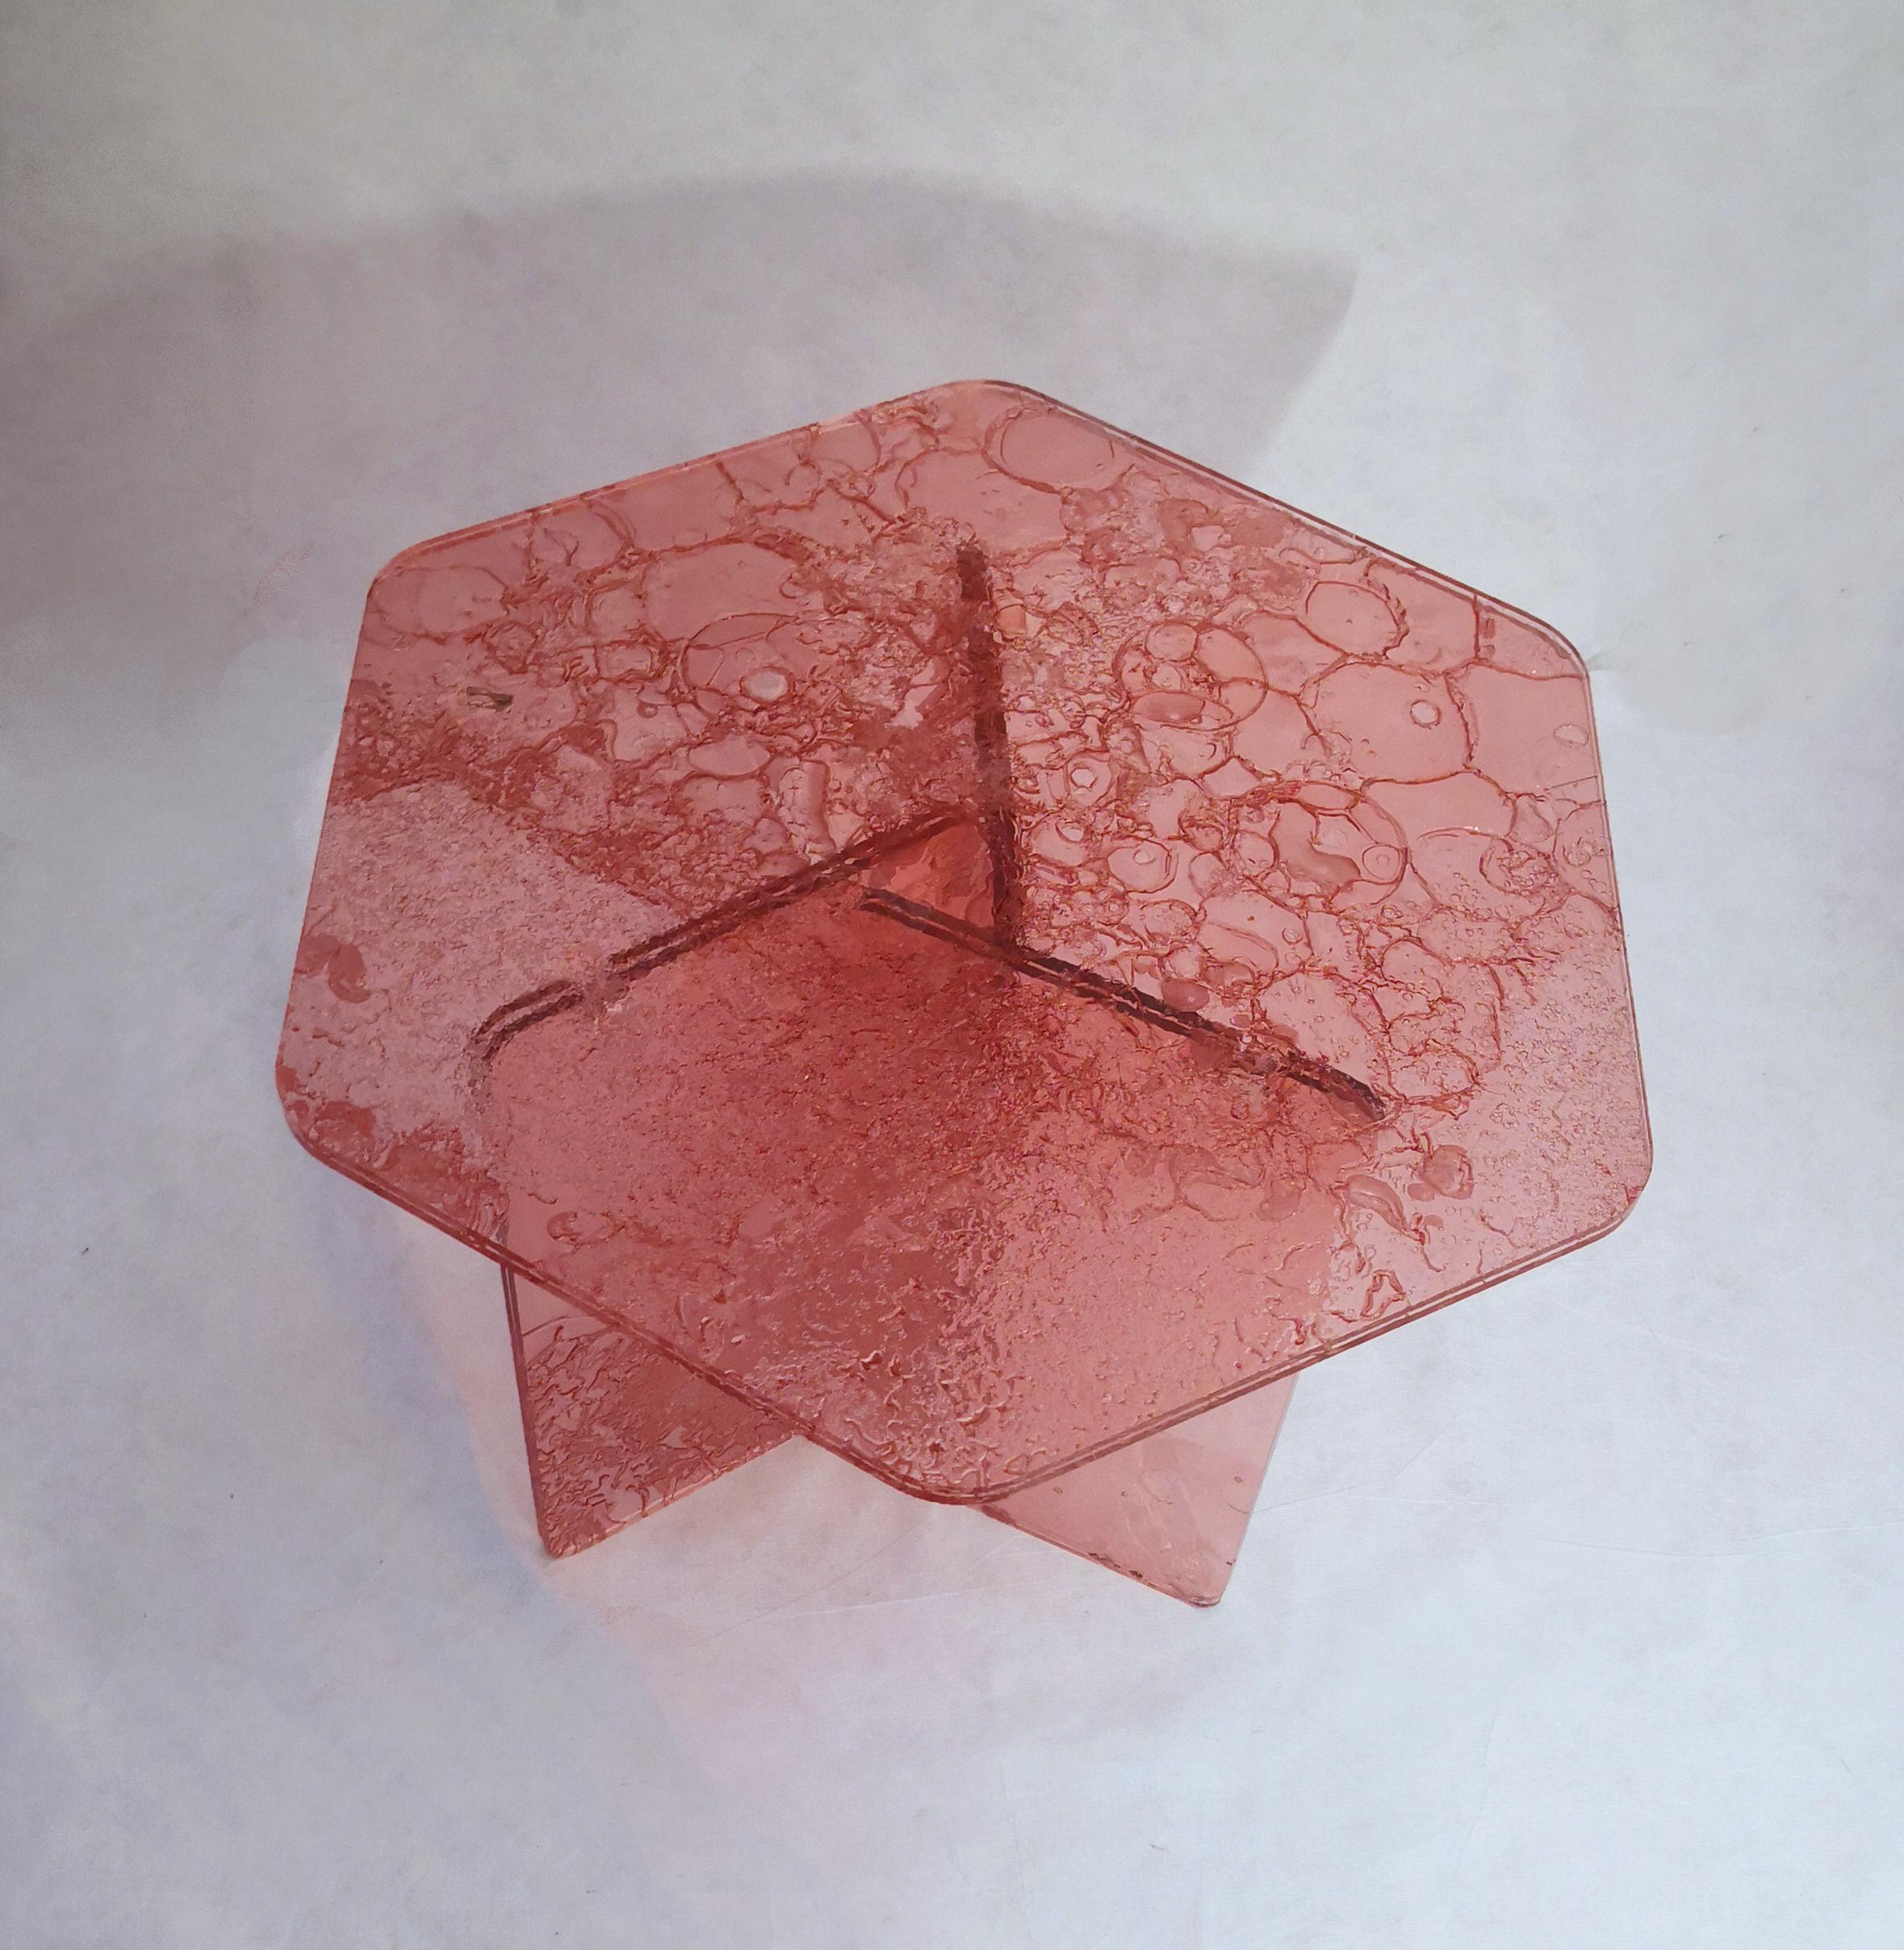 Machine-Made Sketch Hexagon Sidetable Made of Pink Acrylic Des, Roberto Giacomucci in 2020 For Sale